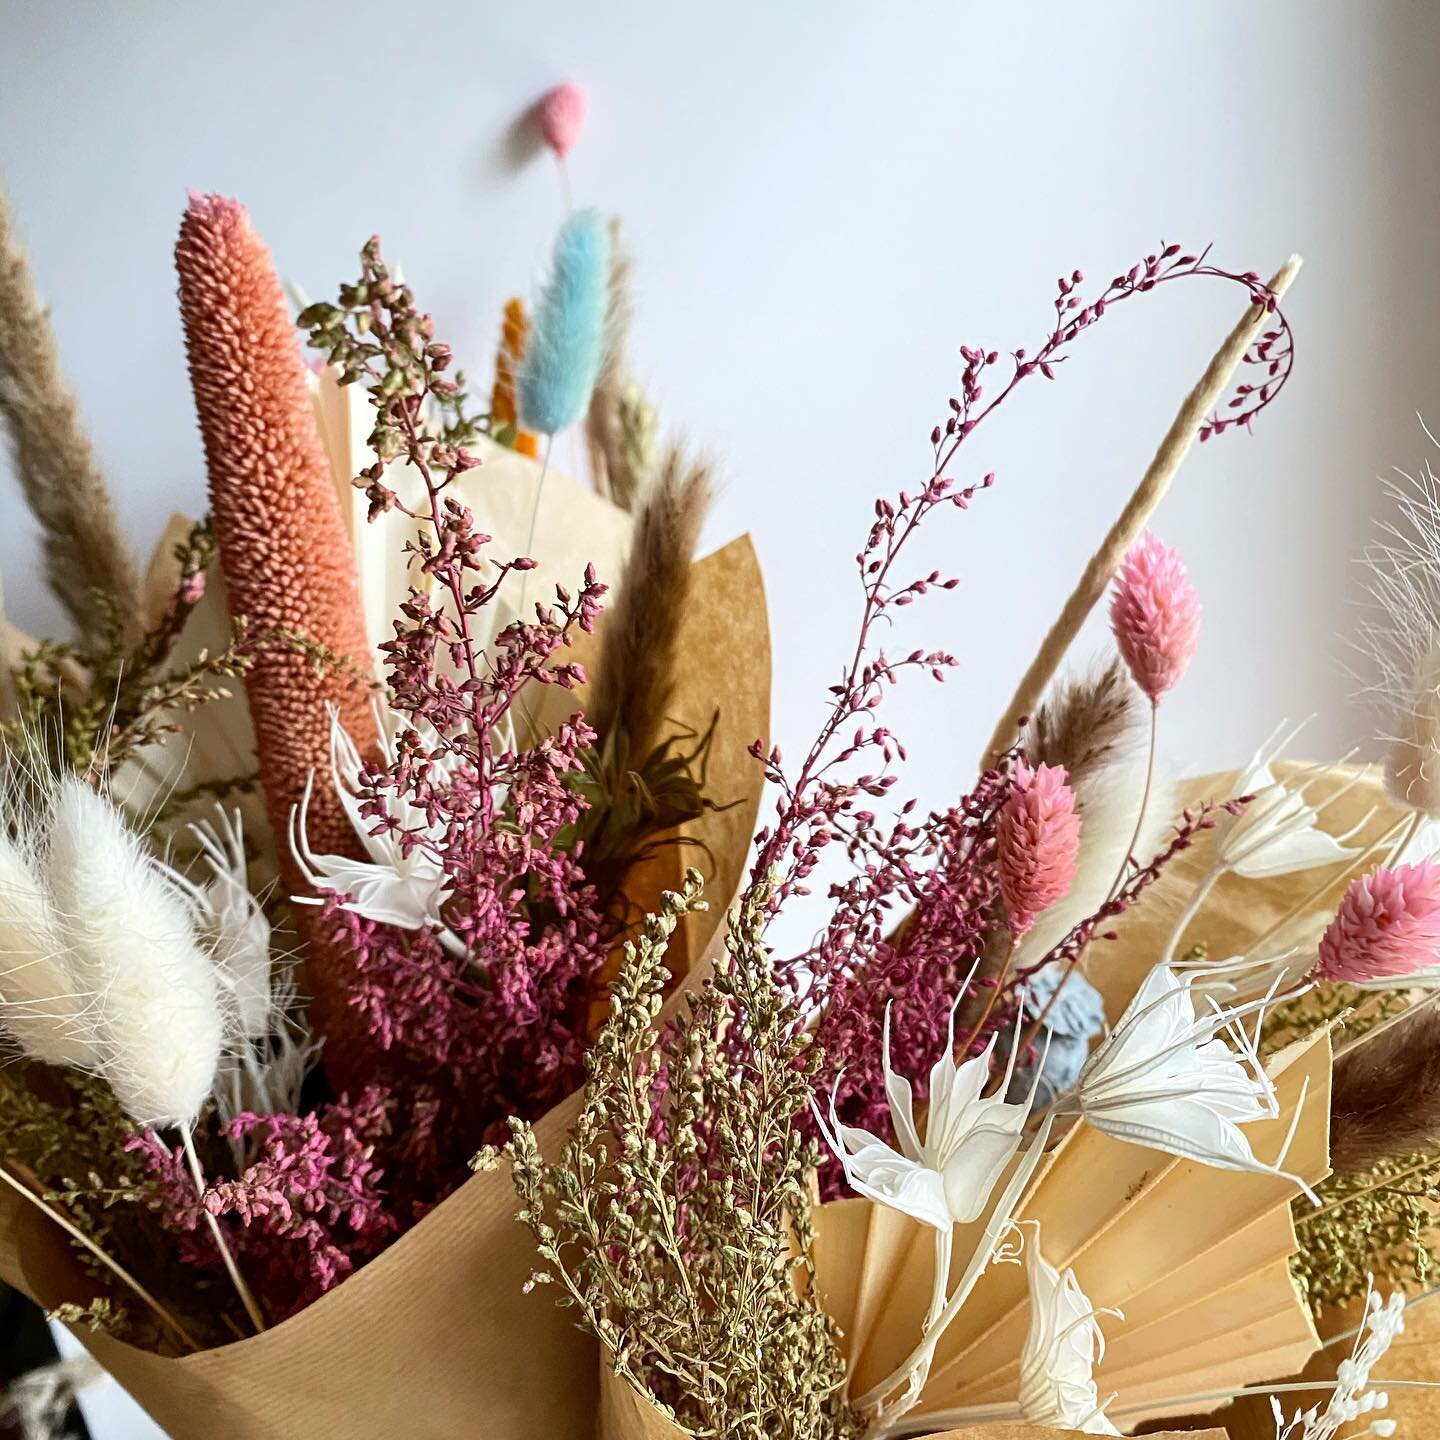 Mini dried posies stocked in @lydiaenniskillen &pound;20 🌸 

Dried flowers last for years, keep out of direct sunlight and no water. ✨

#limitedavailability #shoplocal #giftidas #mothersday #driedflowers #driedposy #lydiaenniskillen #flowersbyruthho